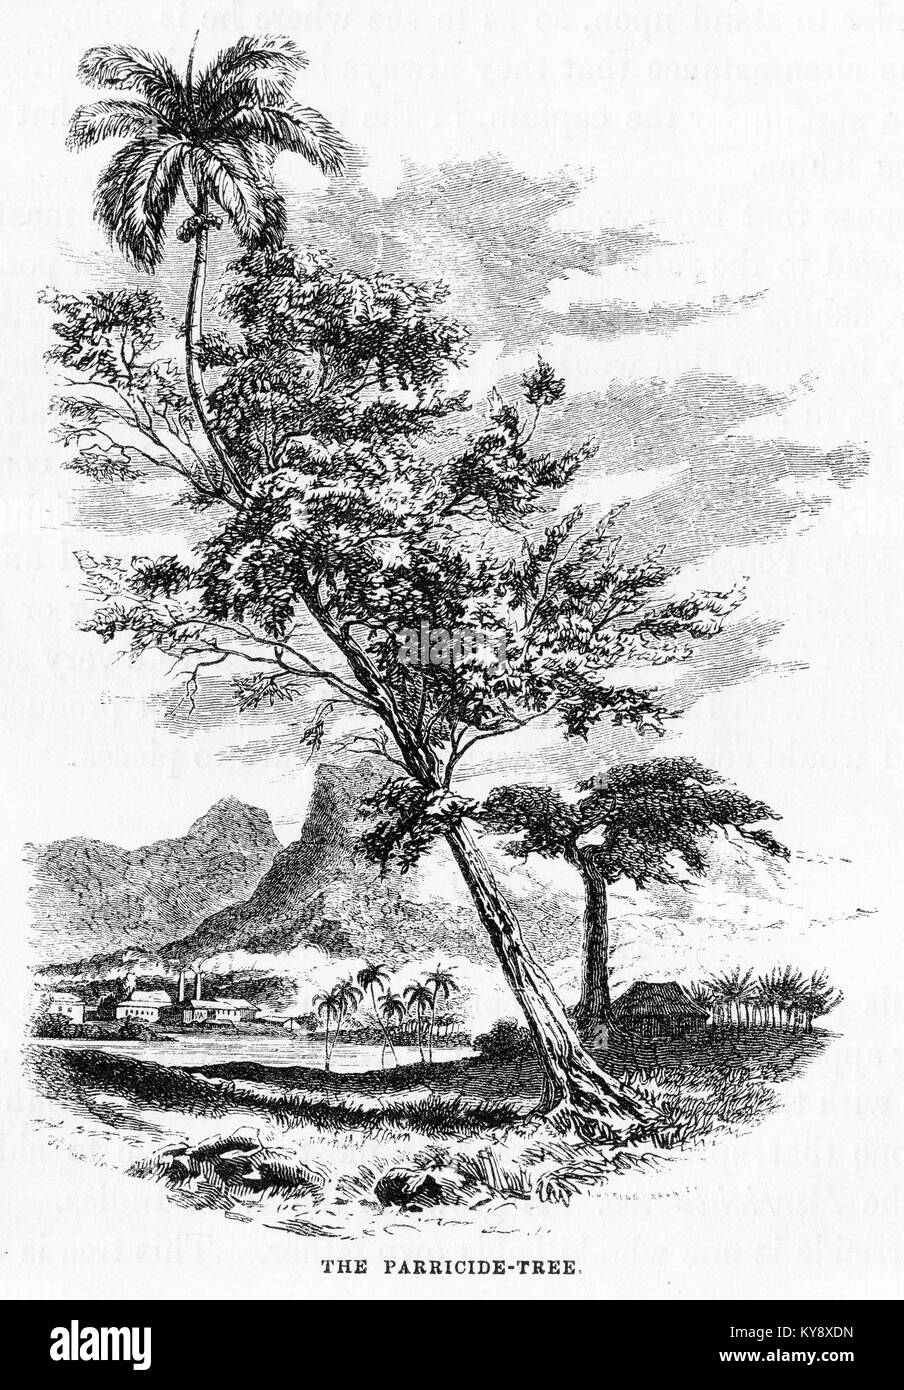 Engraving of a species of parasitic tree growing on a coconut palm in the tropics. From an original engraving in the Harper's Story Books by Jacob Abbott, 1854. Stock Photo